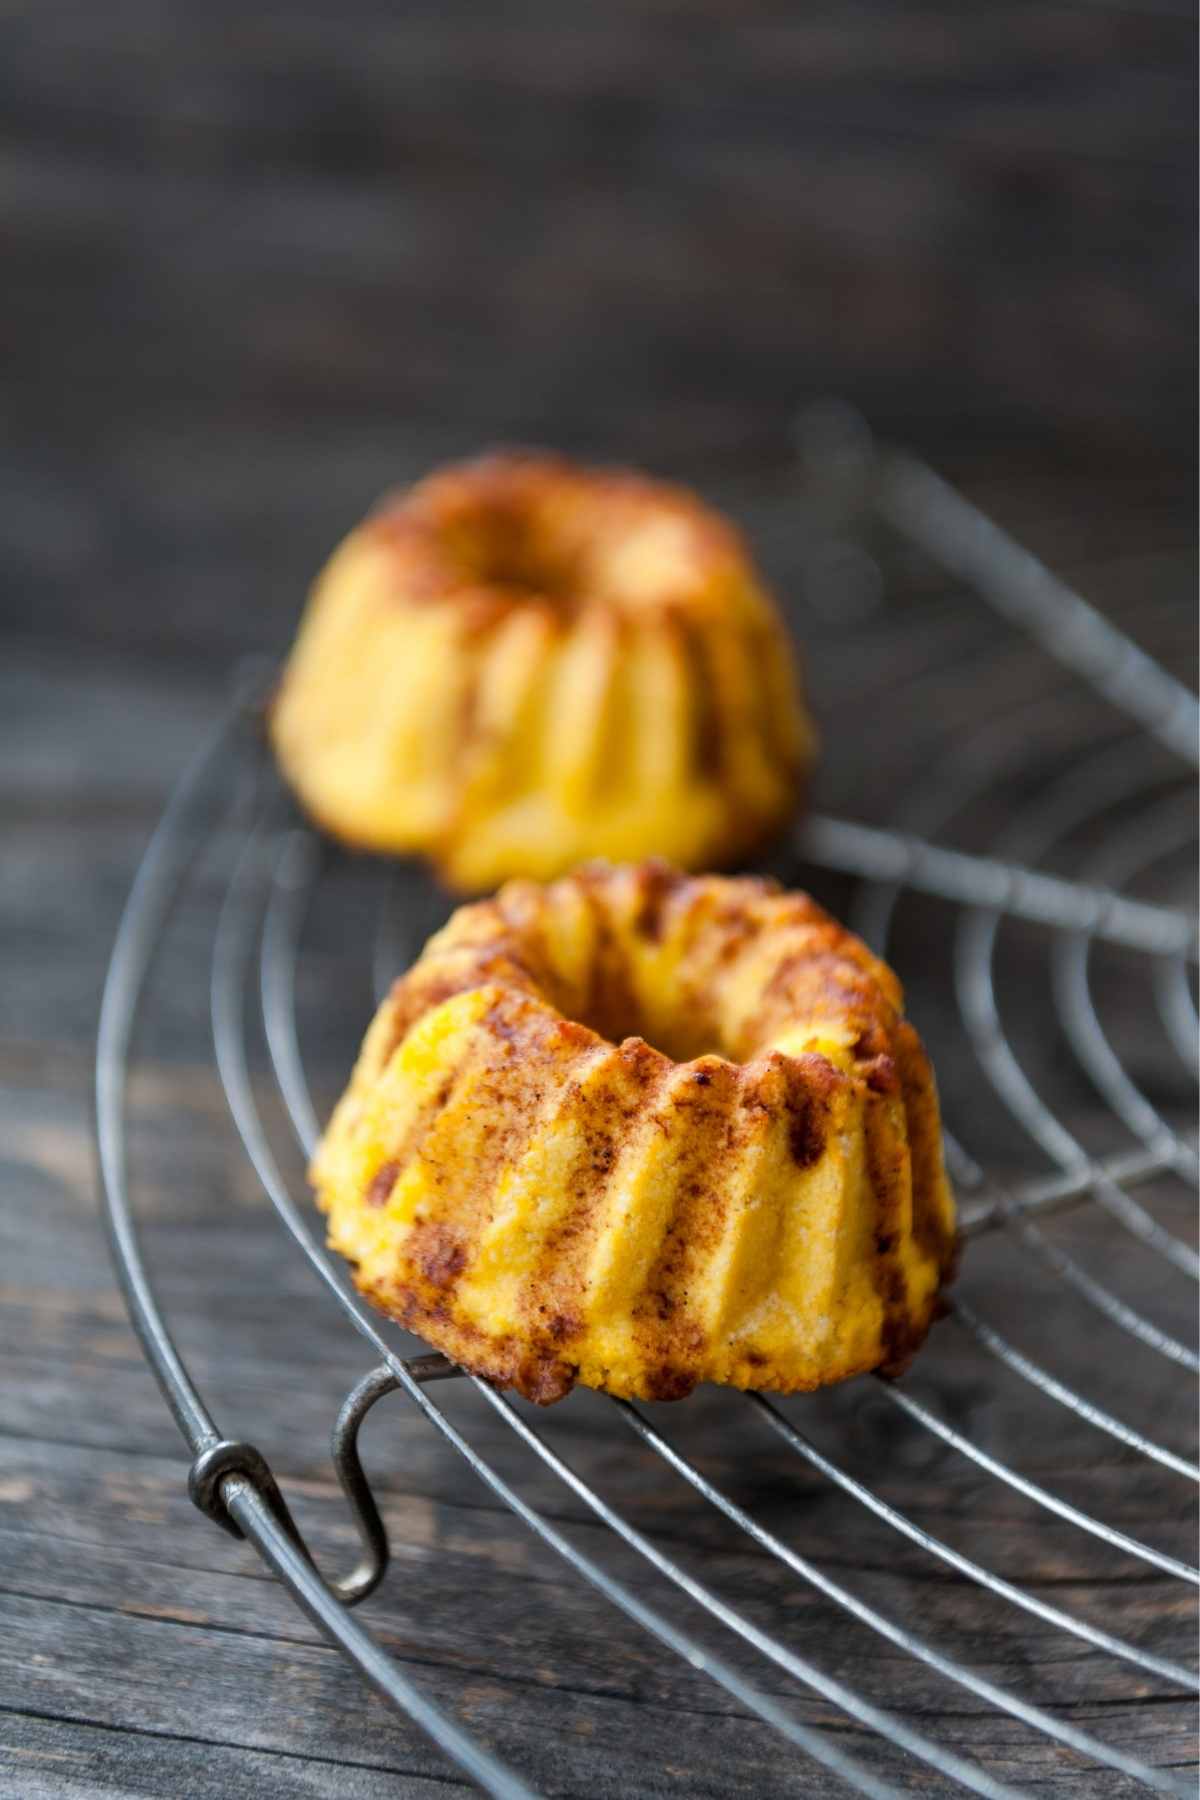 Whether you’re baking for yourself or hosting a party, mini bundt cakes are super-convenient. Because of their smaller size, your cake will be ready faster, and you’ll get to enjoy it sooner!